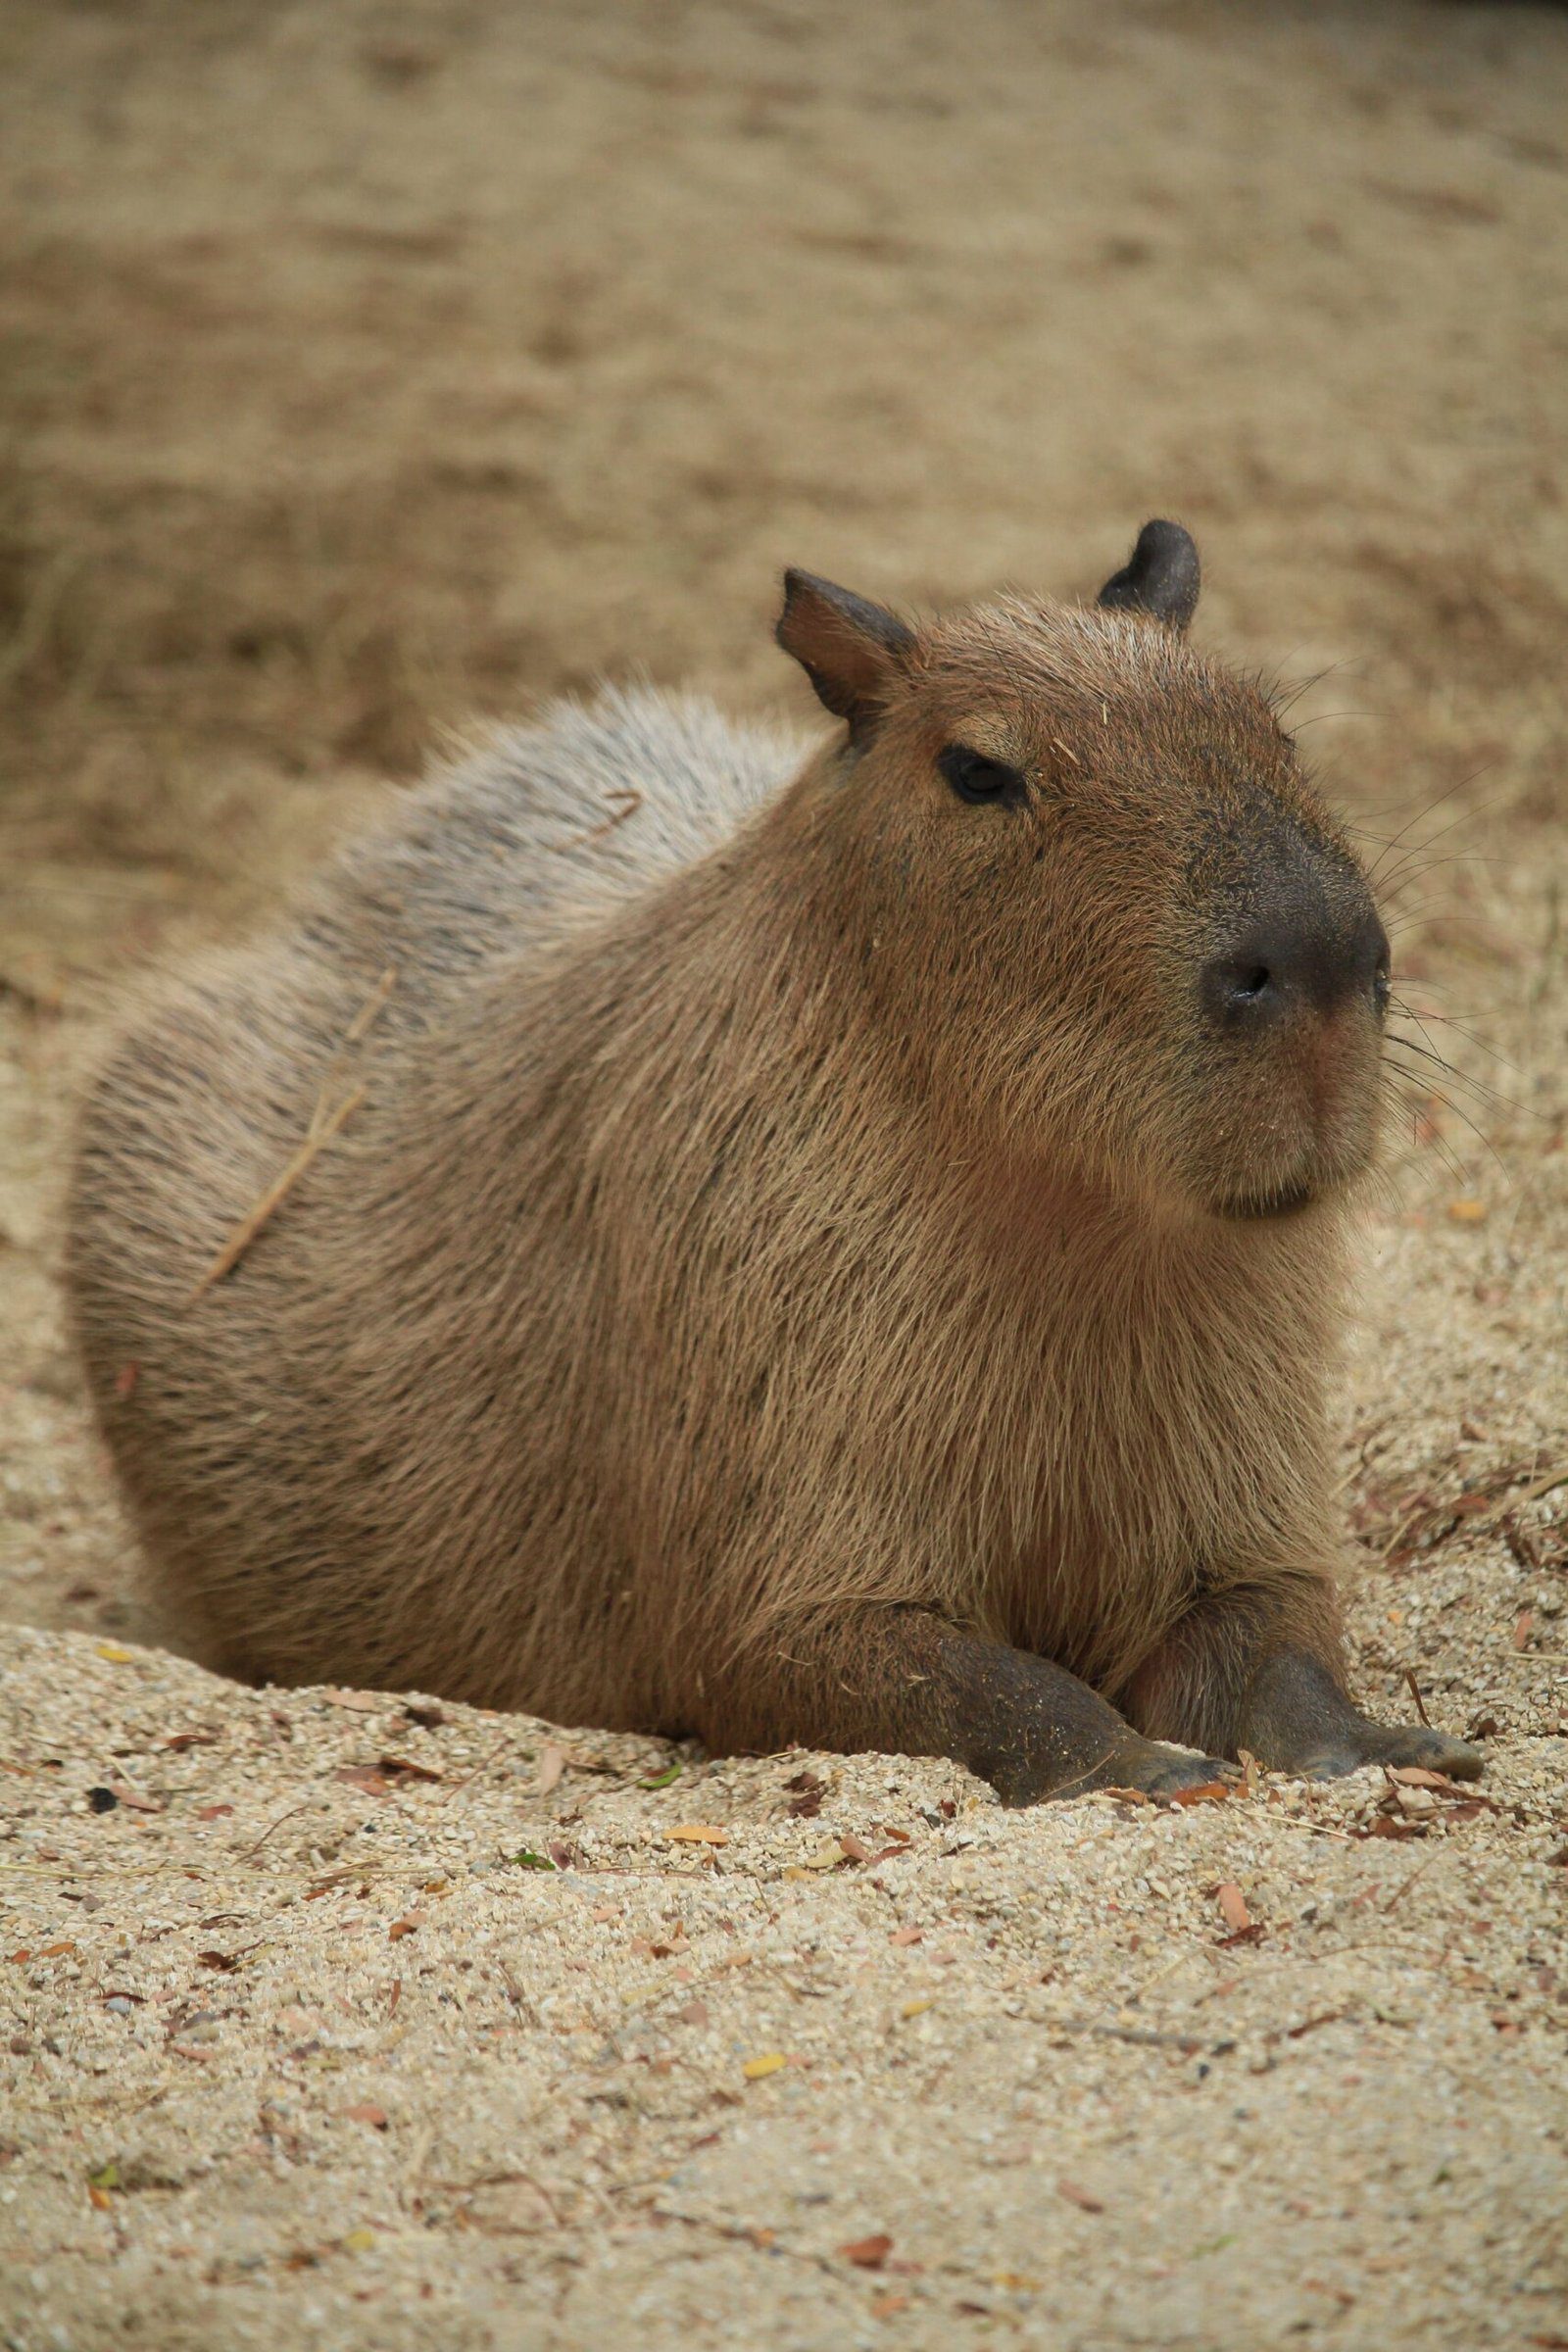 The Price of Capybaras: Are They Affordable?